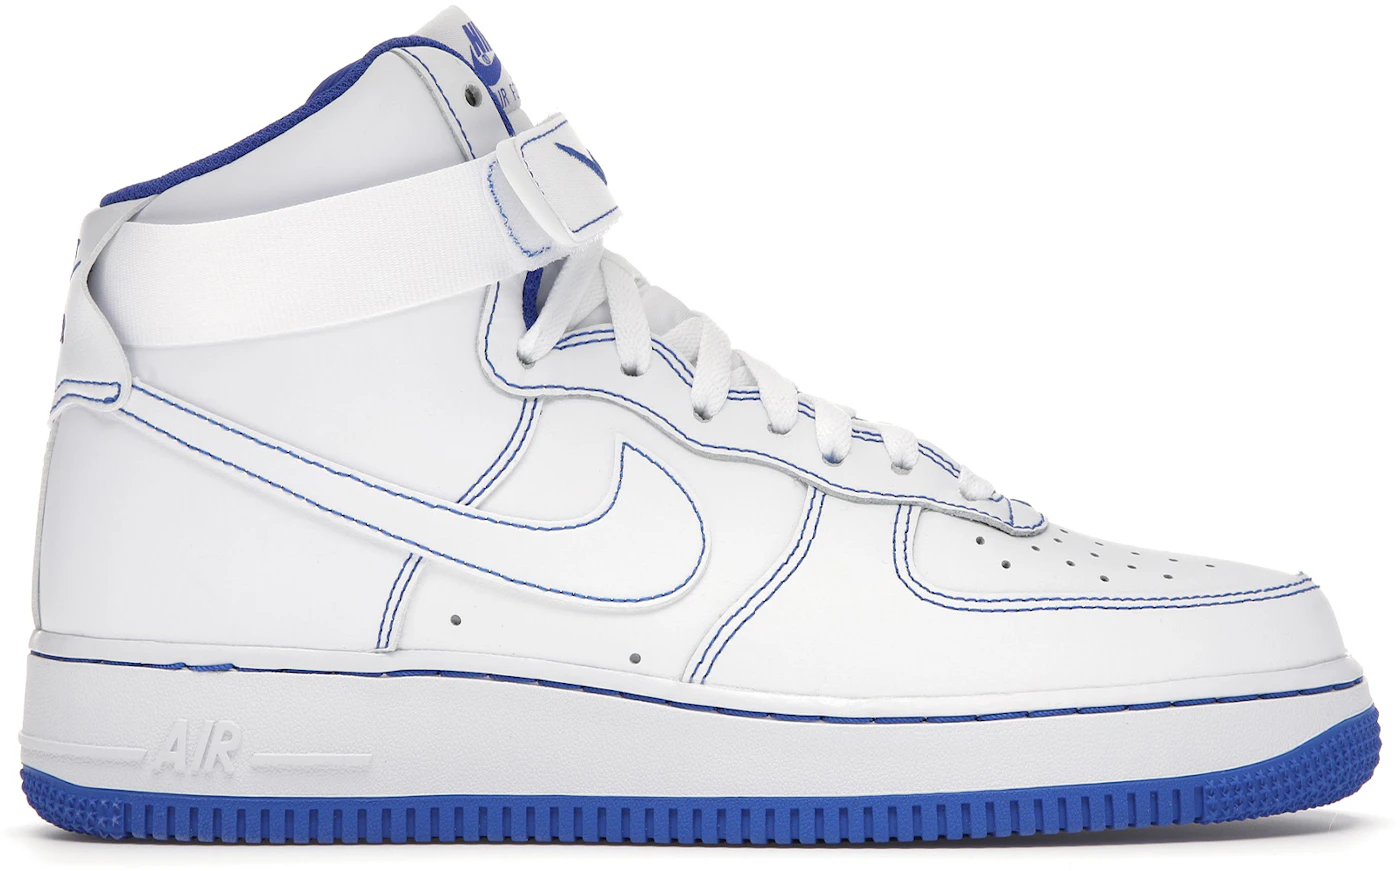 Nike Air Force 1 High White Red CV1753-100 Release Date - SBD